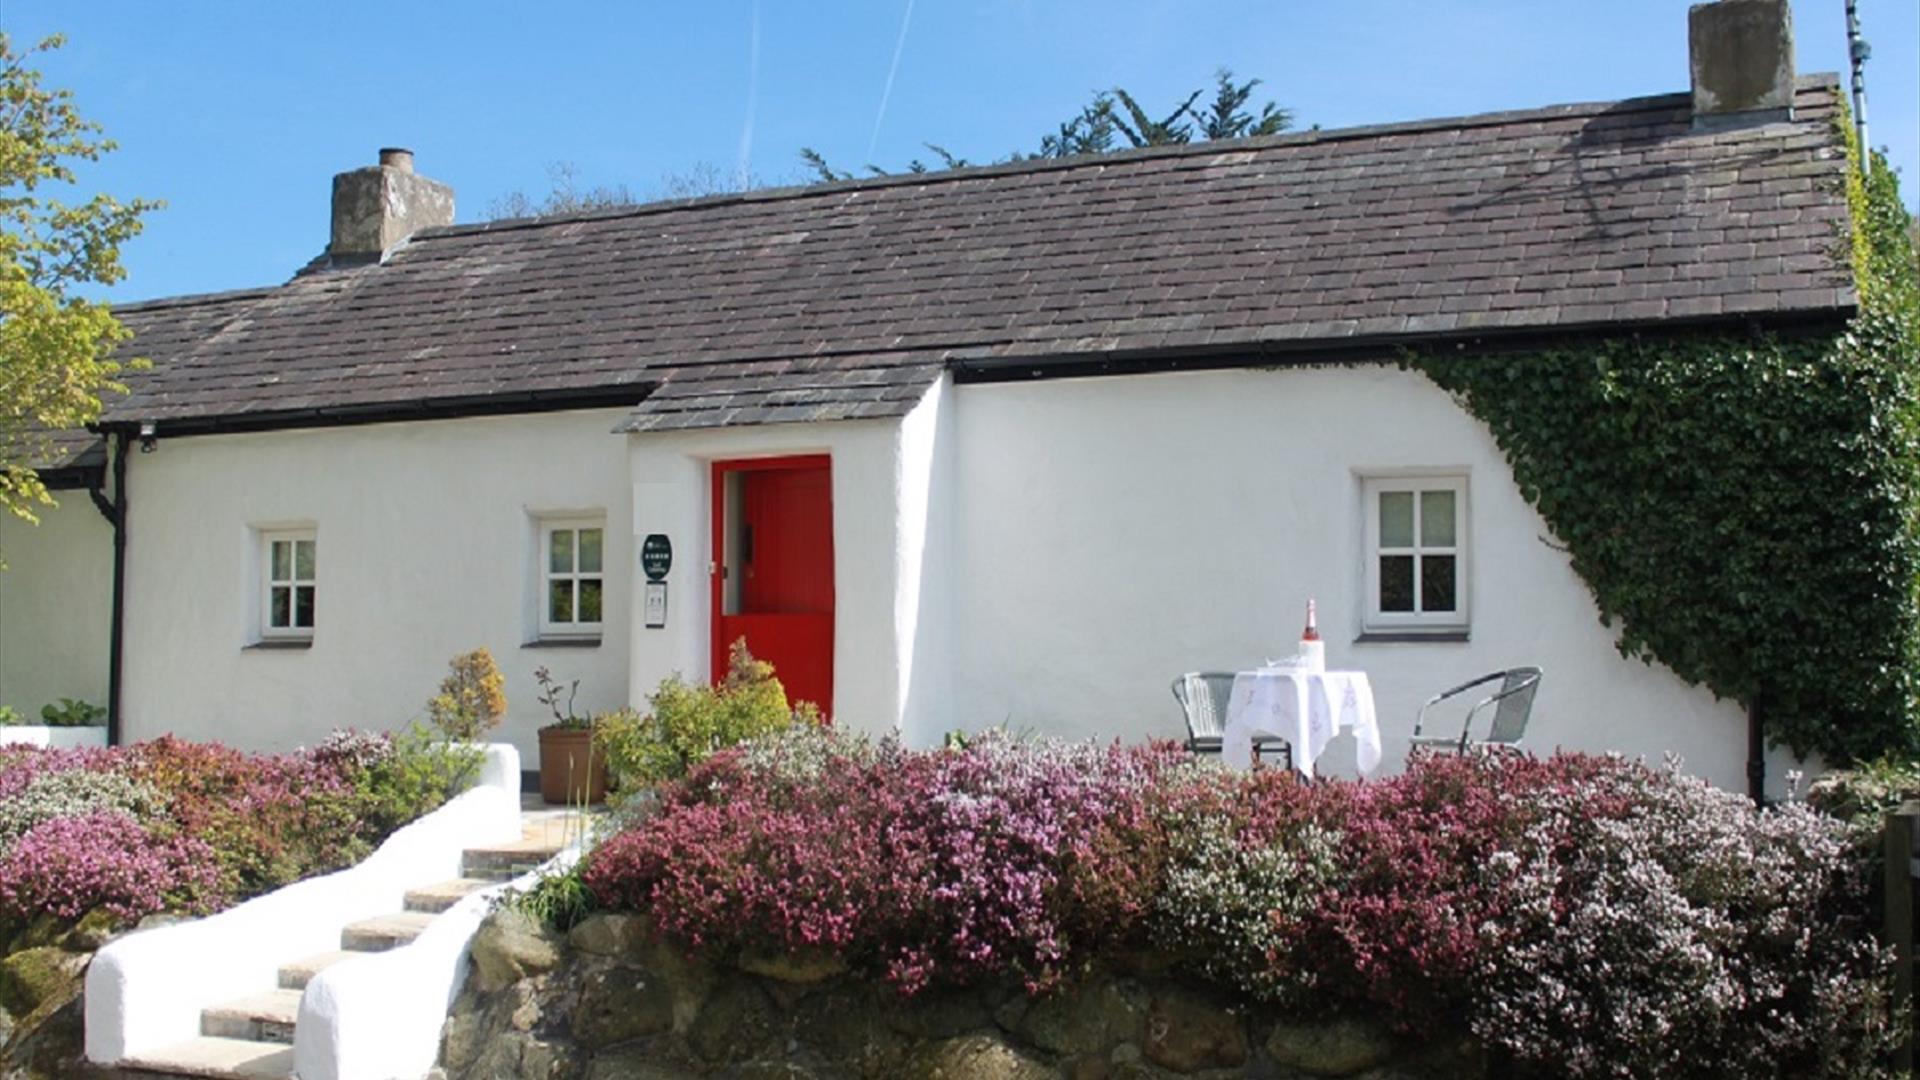 Image of the outside of Scott’s Barn, a luxurious five star 400 year old self catering Irish cottage